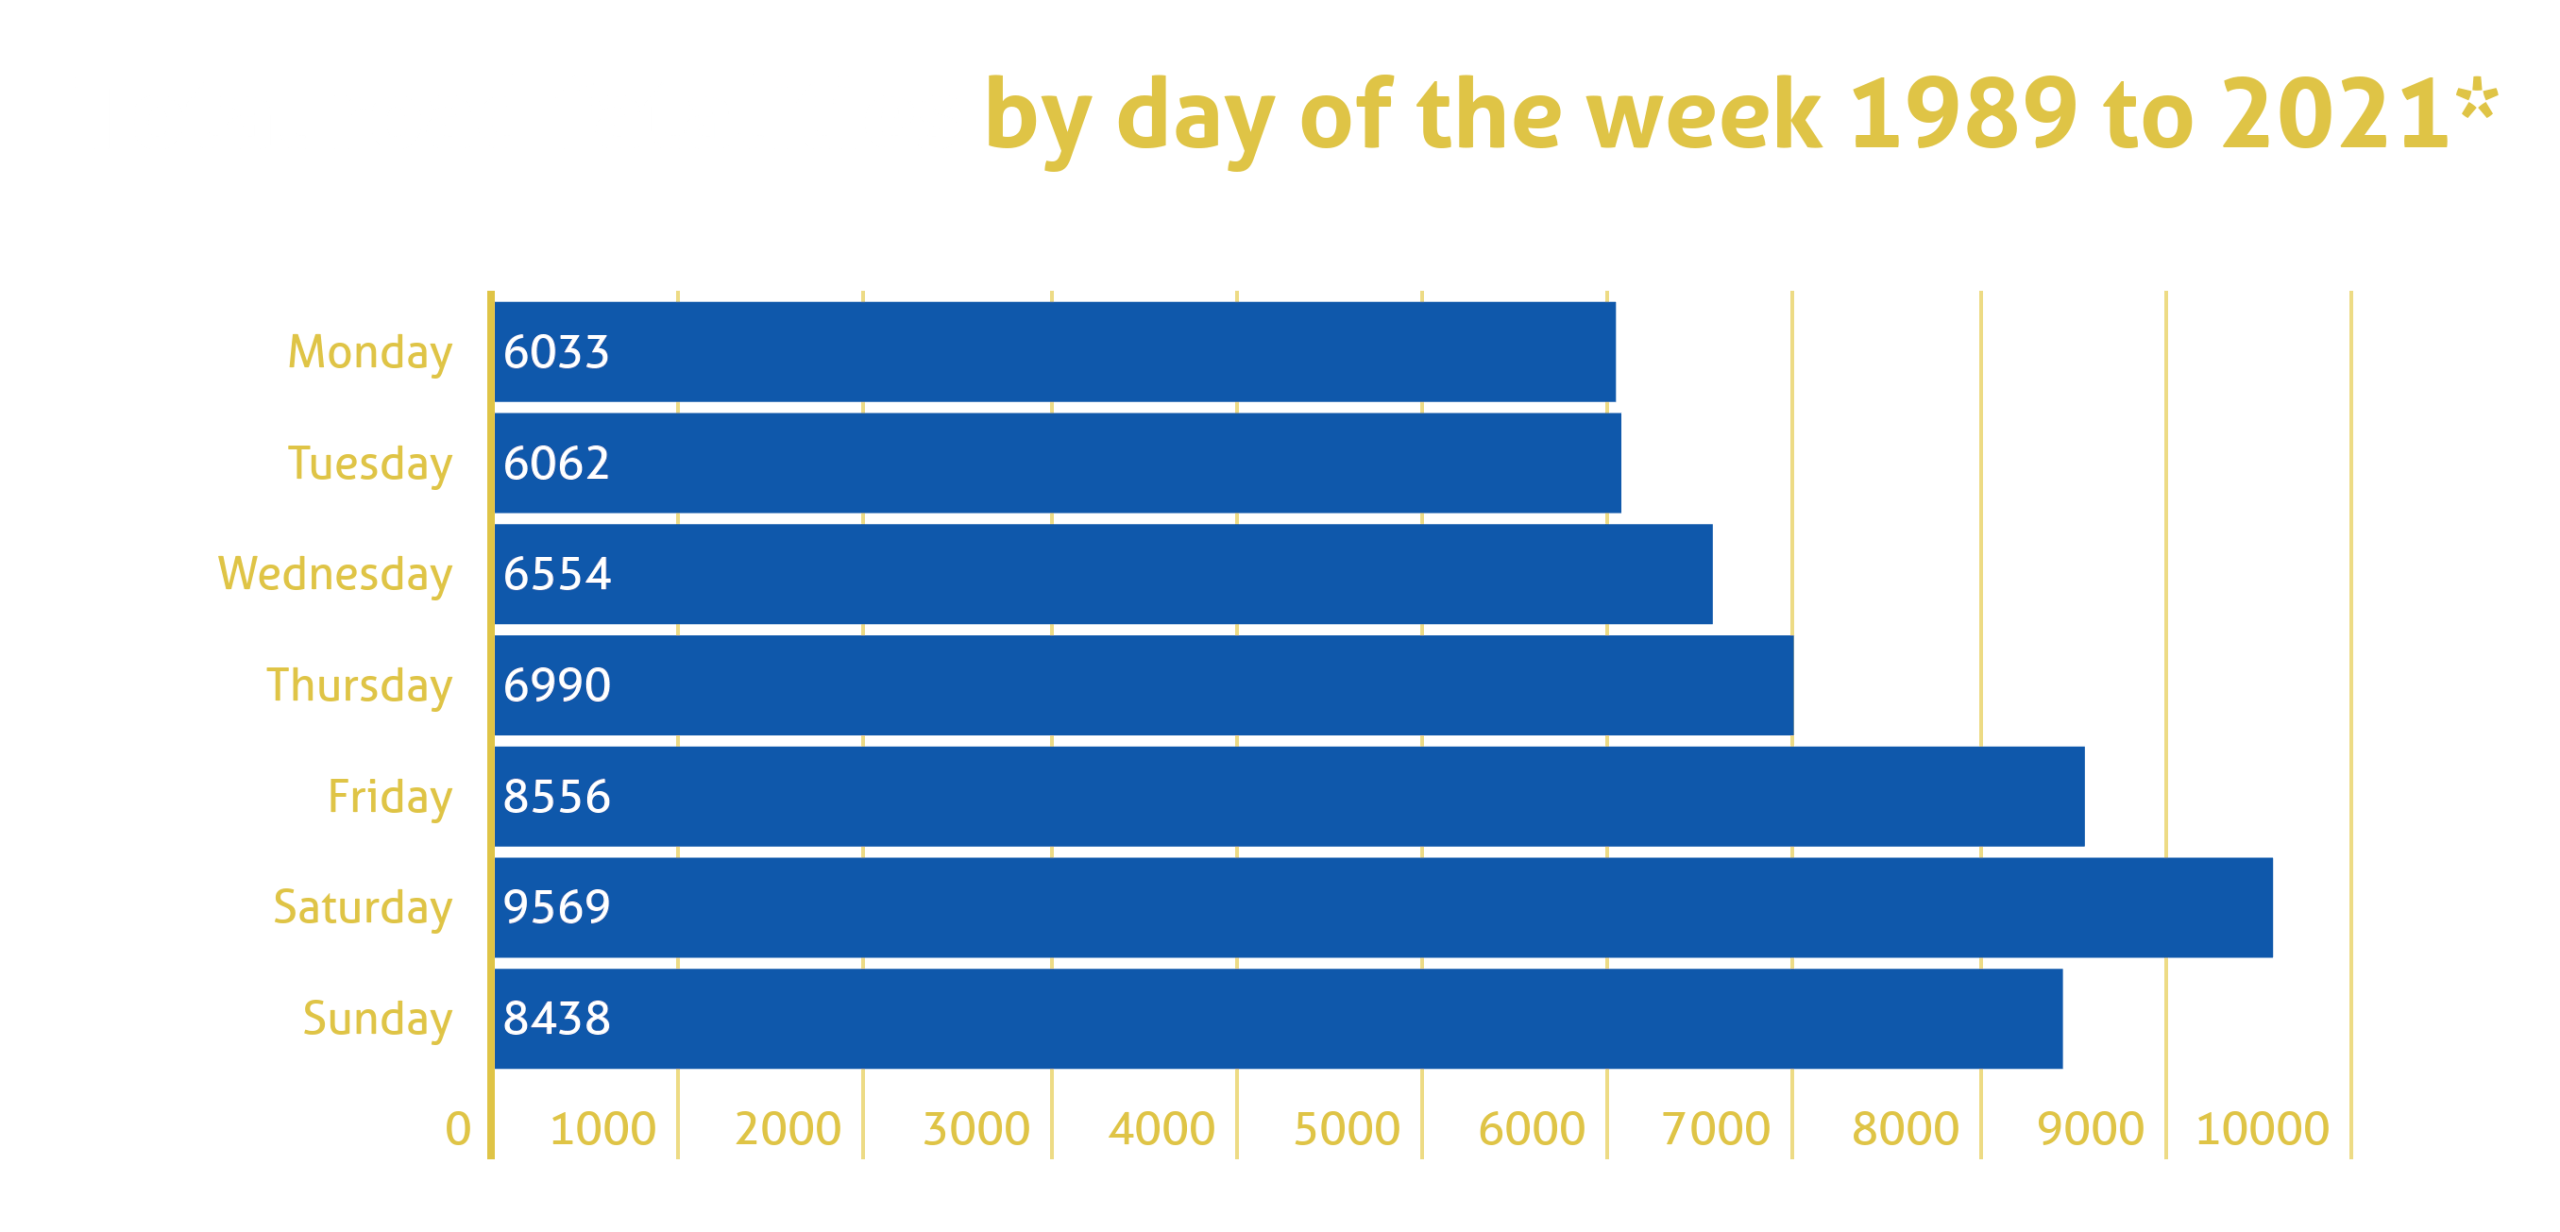 A bar chart showing Australian road fatalities from 1989 to 2021 by day of the week